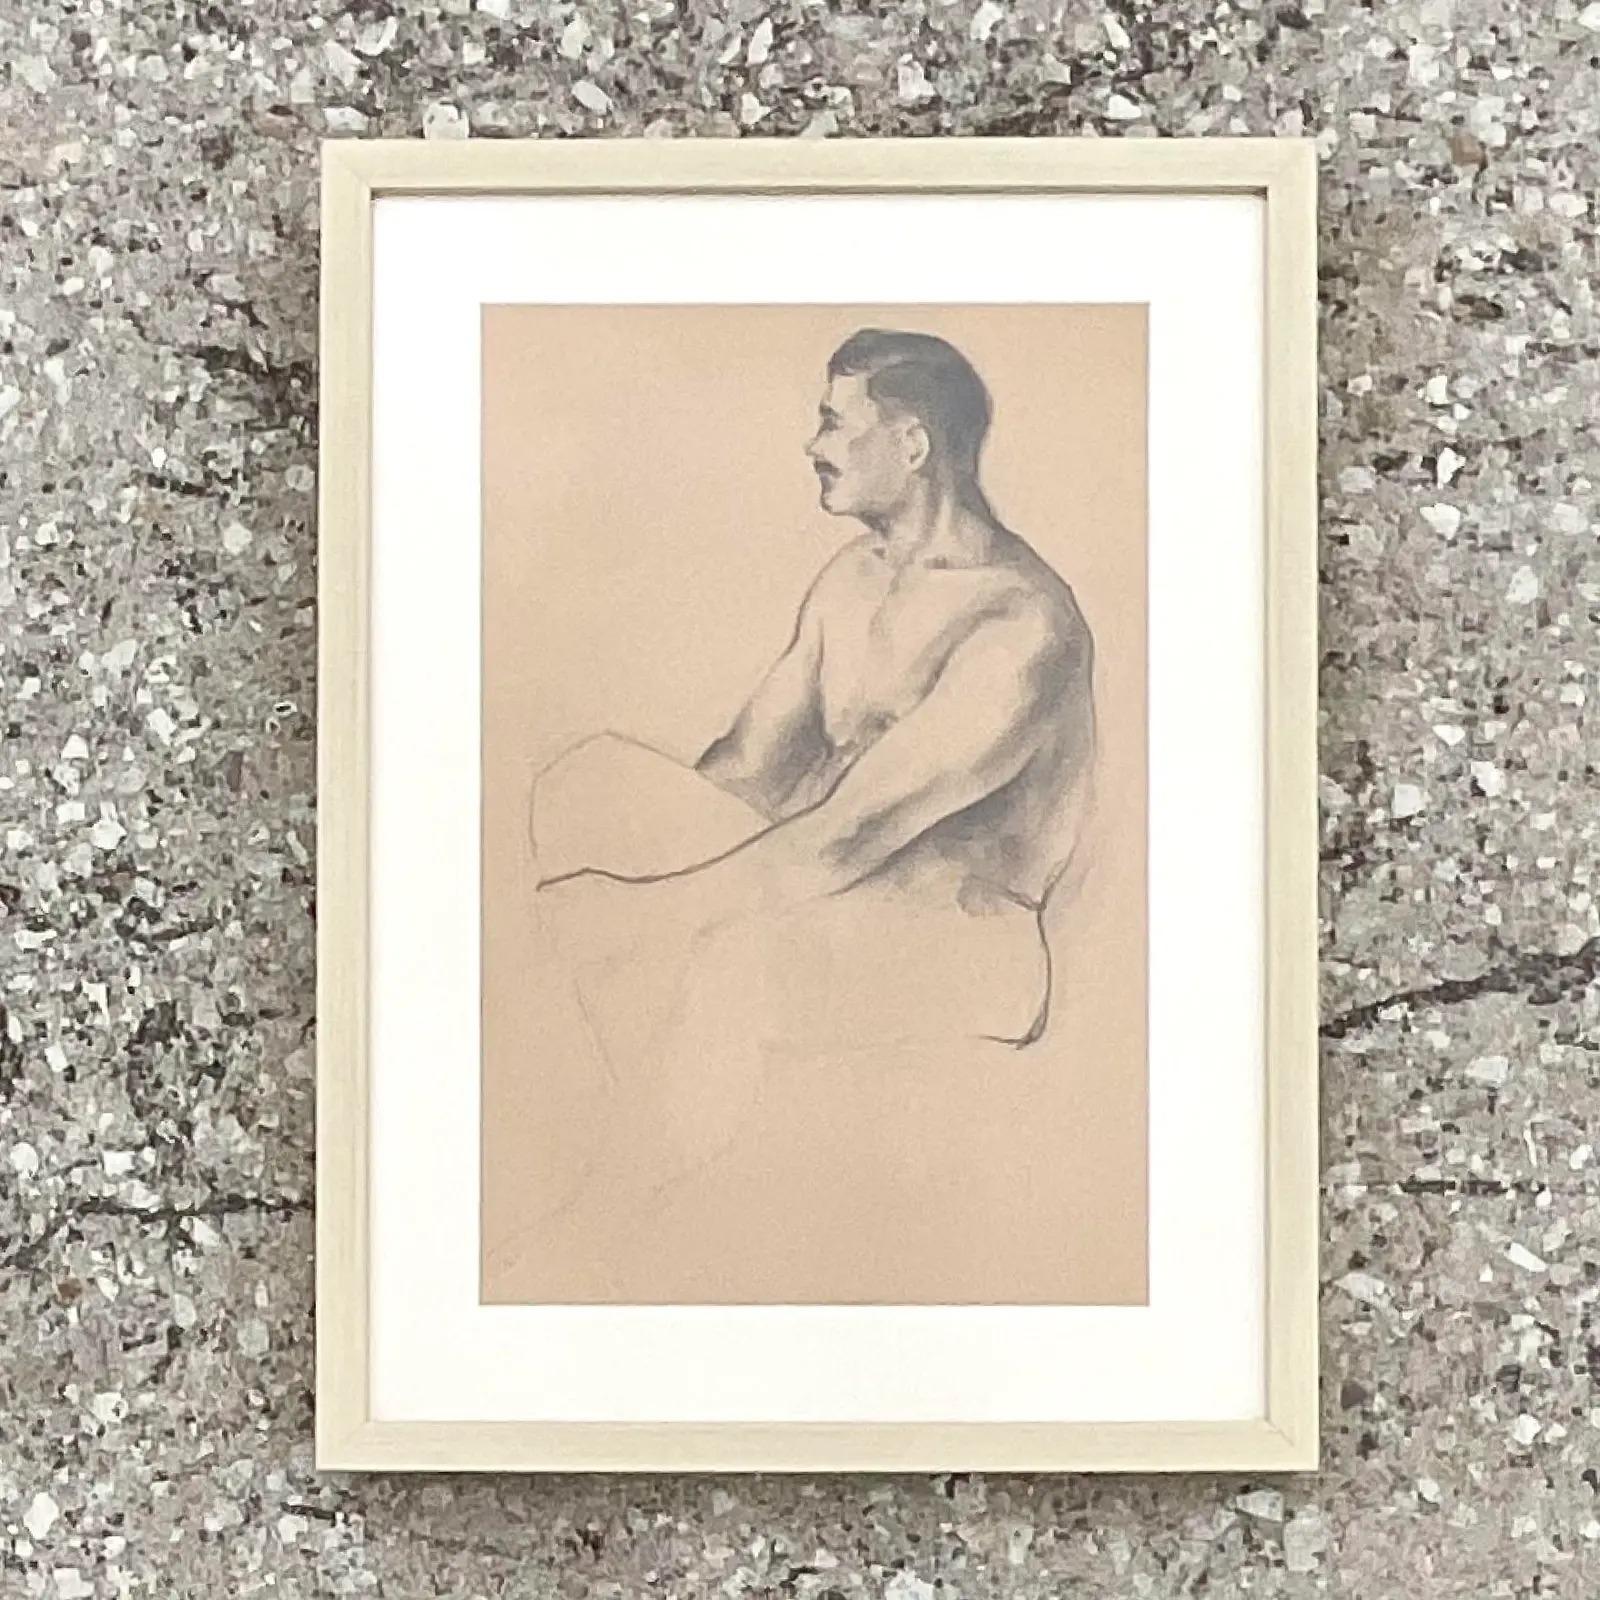 A fabulous vintage Boho 1930s original drawing. A chic pencil sketch of a nude male. Acquired from a Palm Beach estate. 